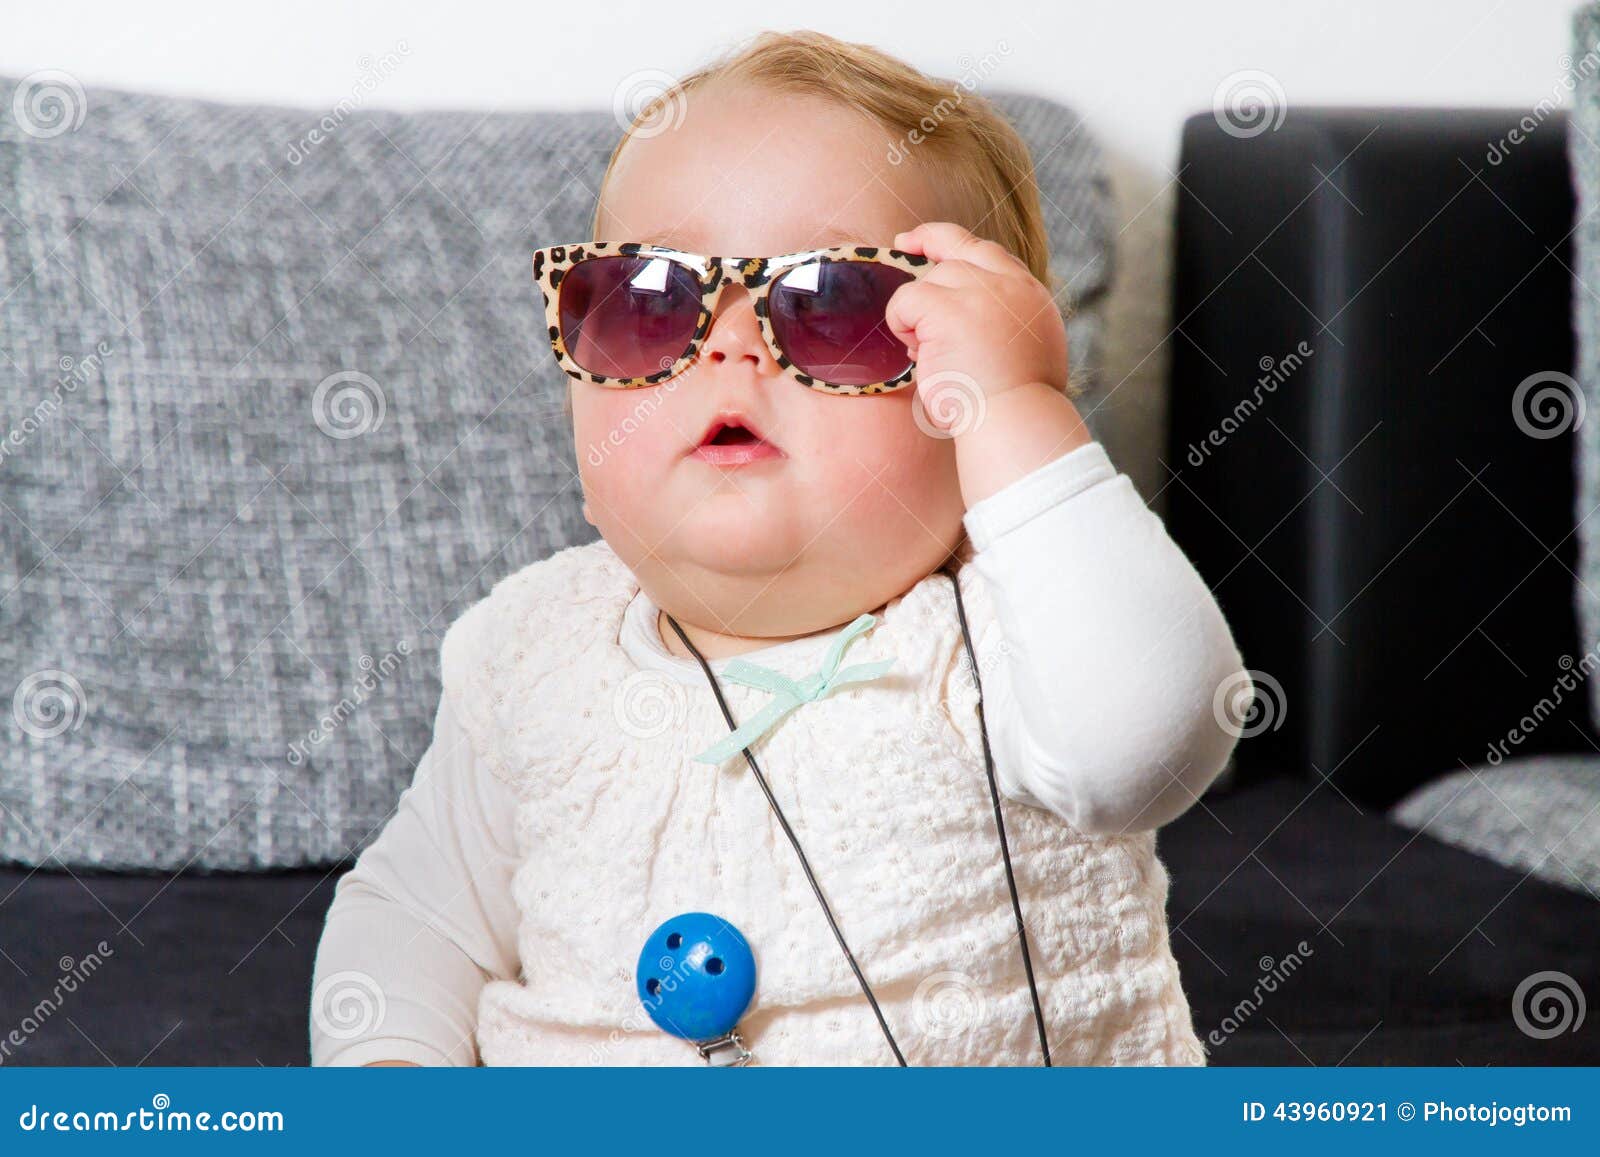 Baby With Sunglasses Stock Photo Image 43960921